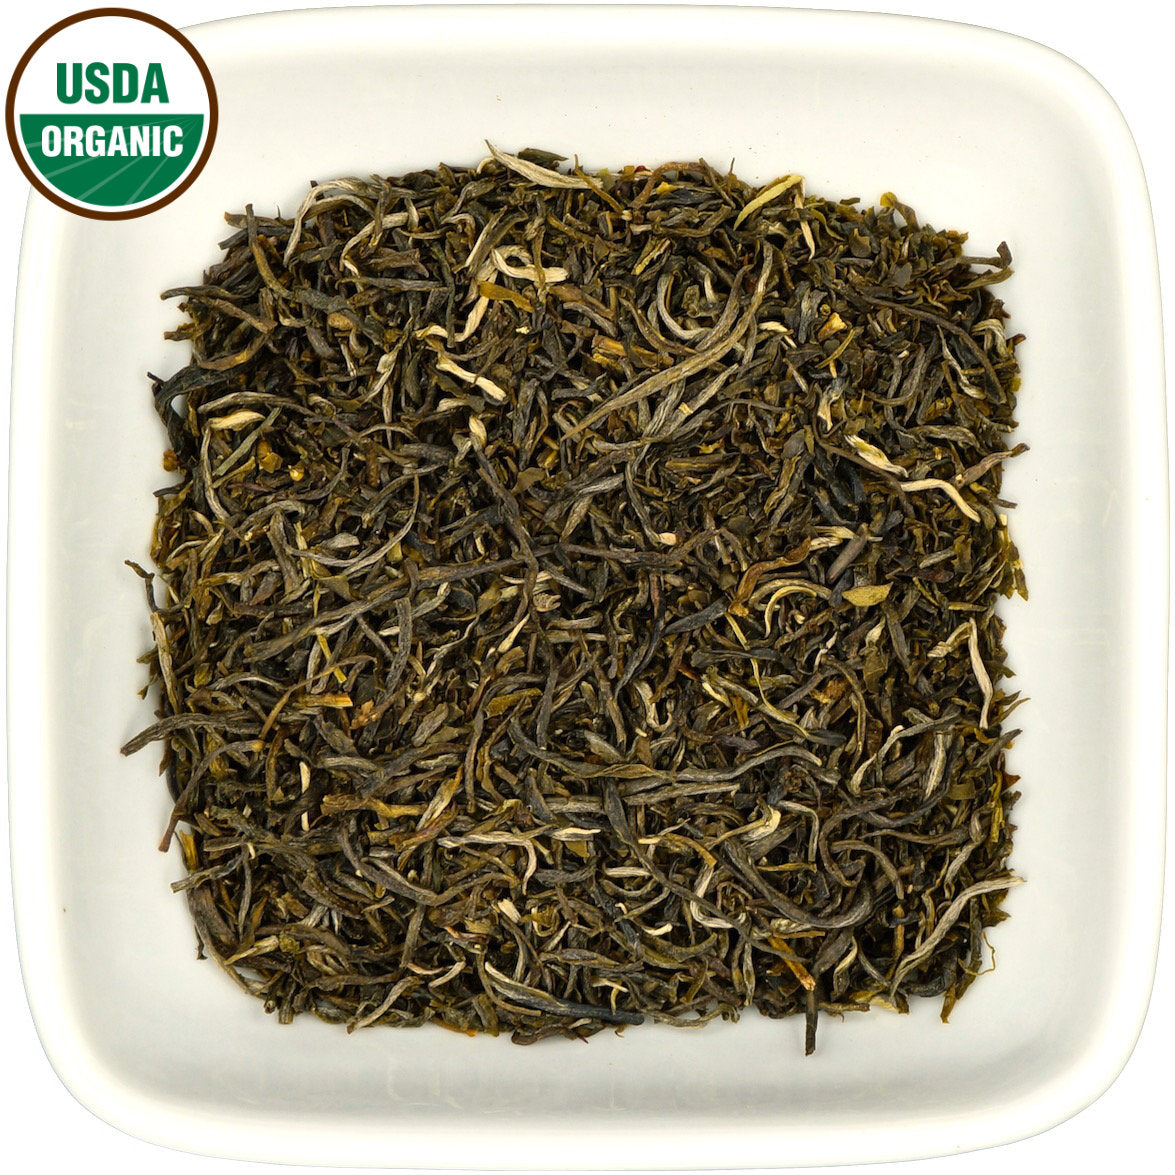 Organic Colombian Green Needles dry leaf view